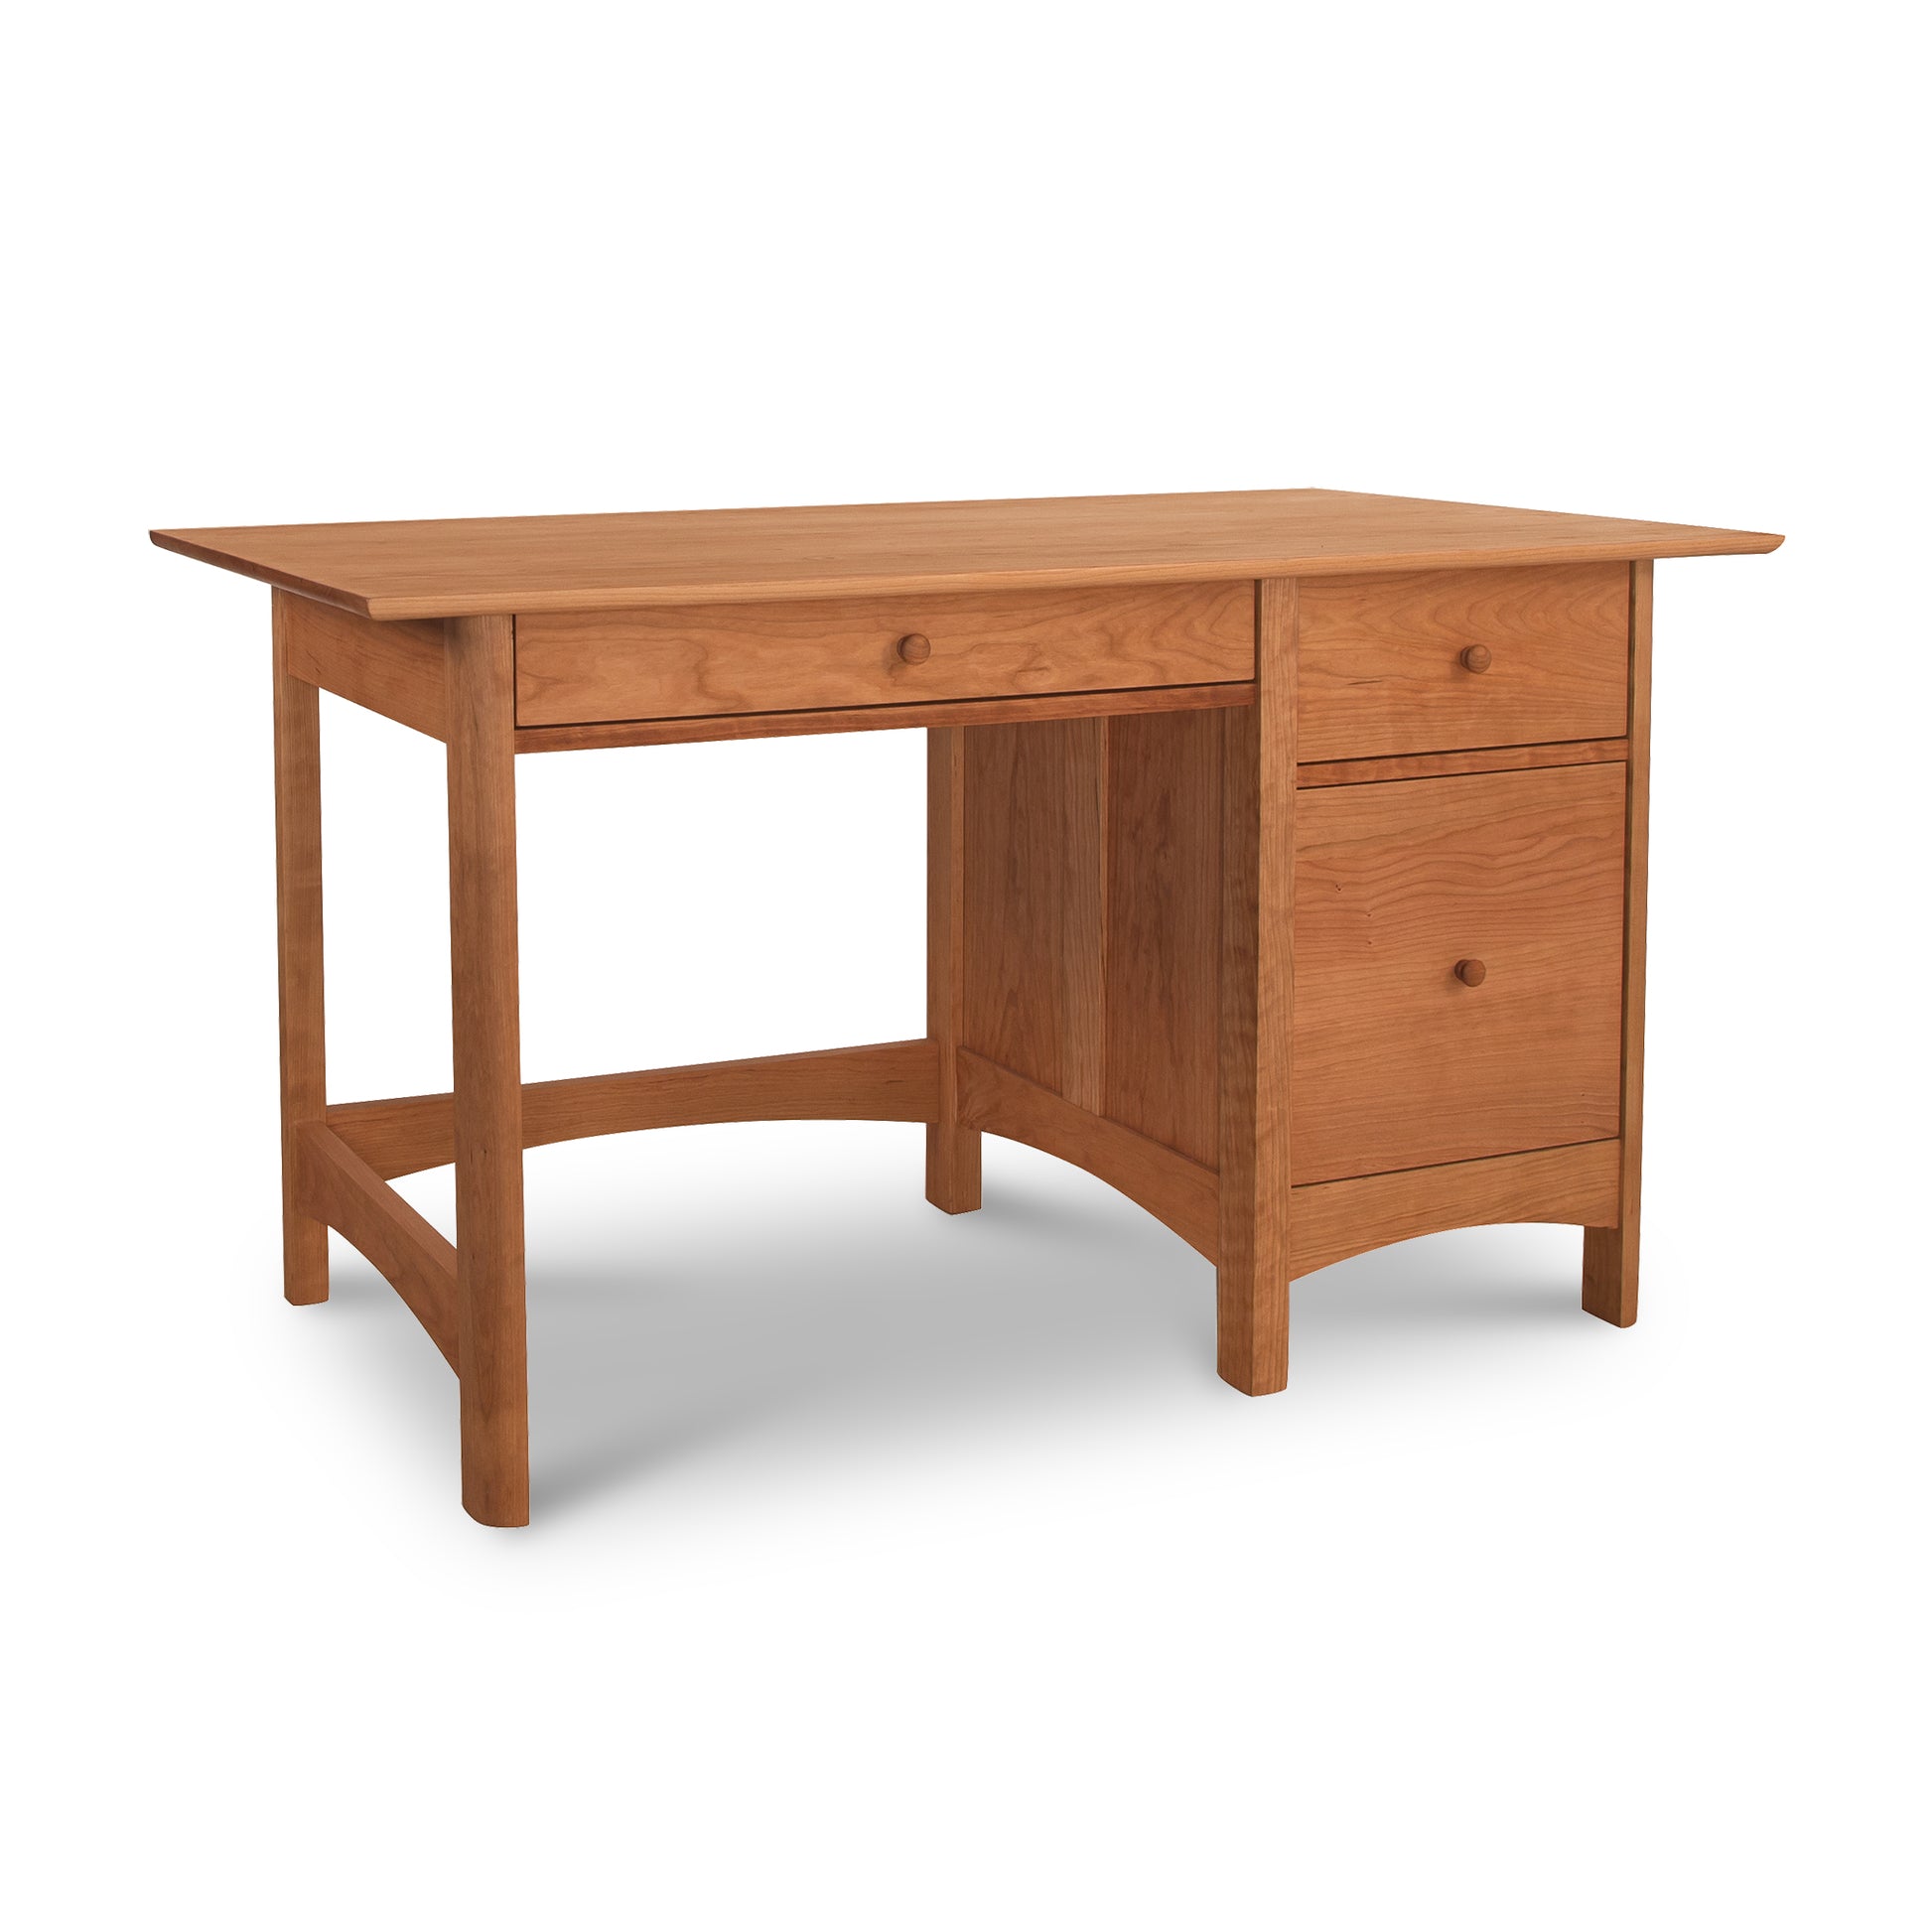 Vermont Furniture Designs Heartwood Shaker Study Desk with a single side drawer and a file cabinet, isolated on a white background.